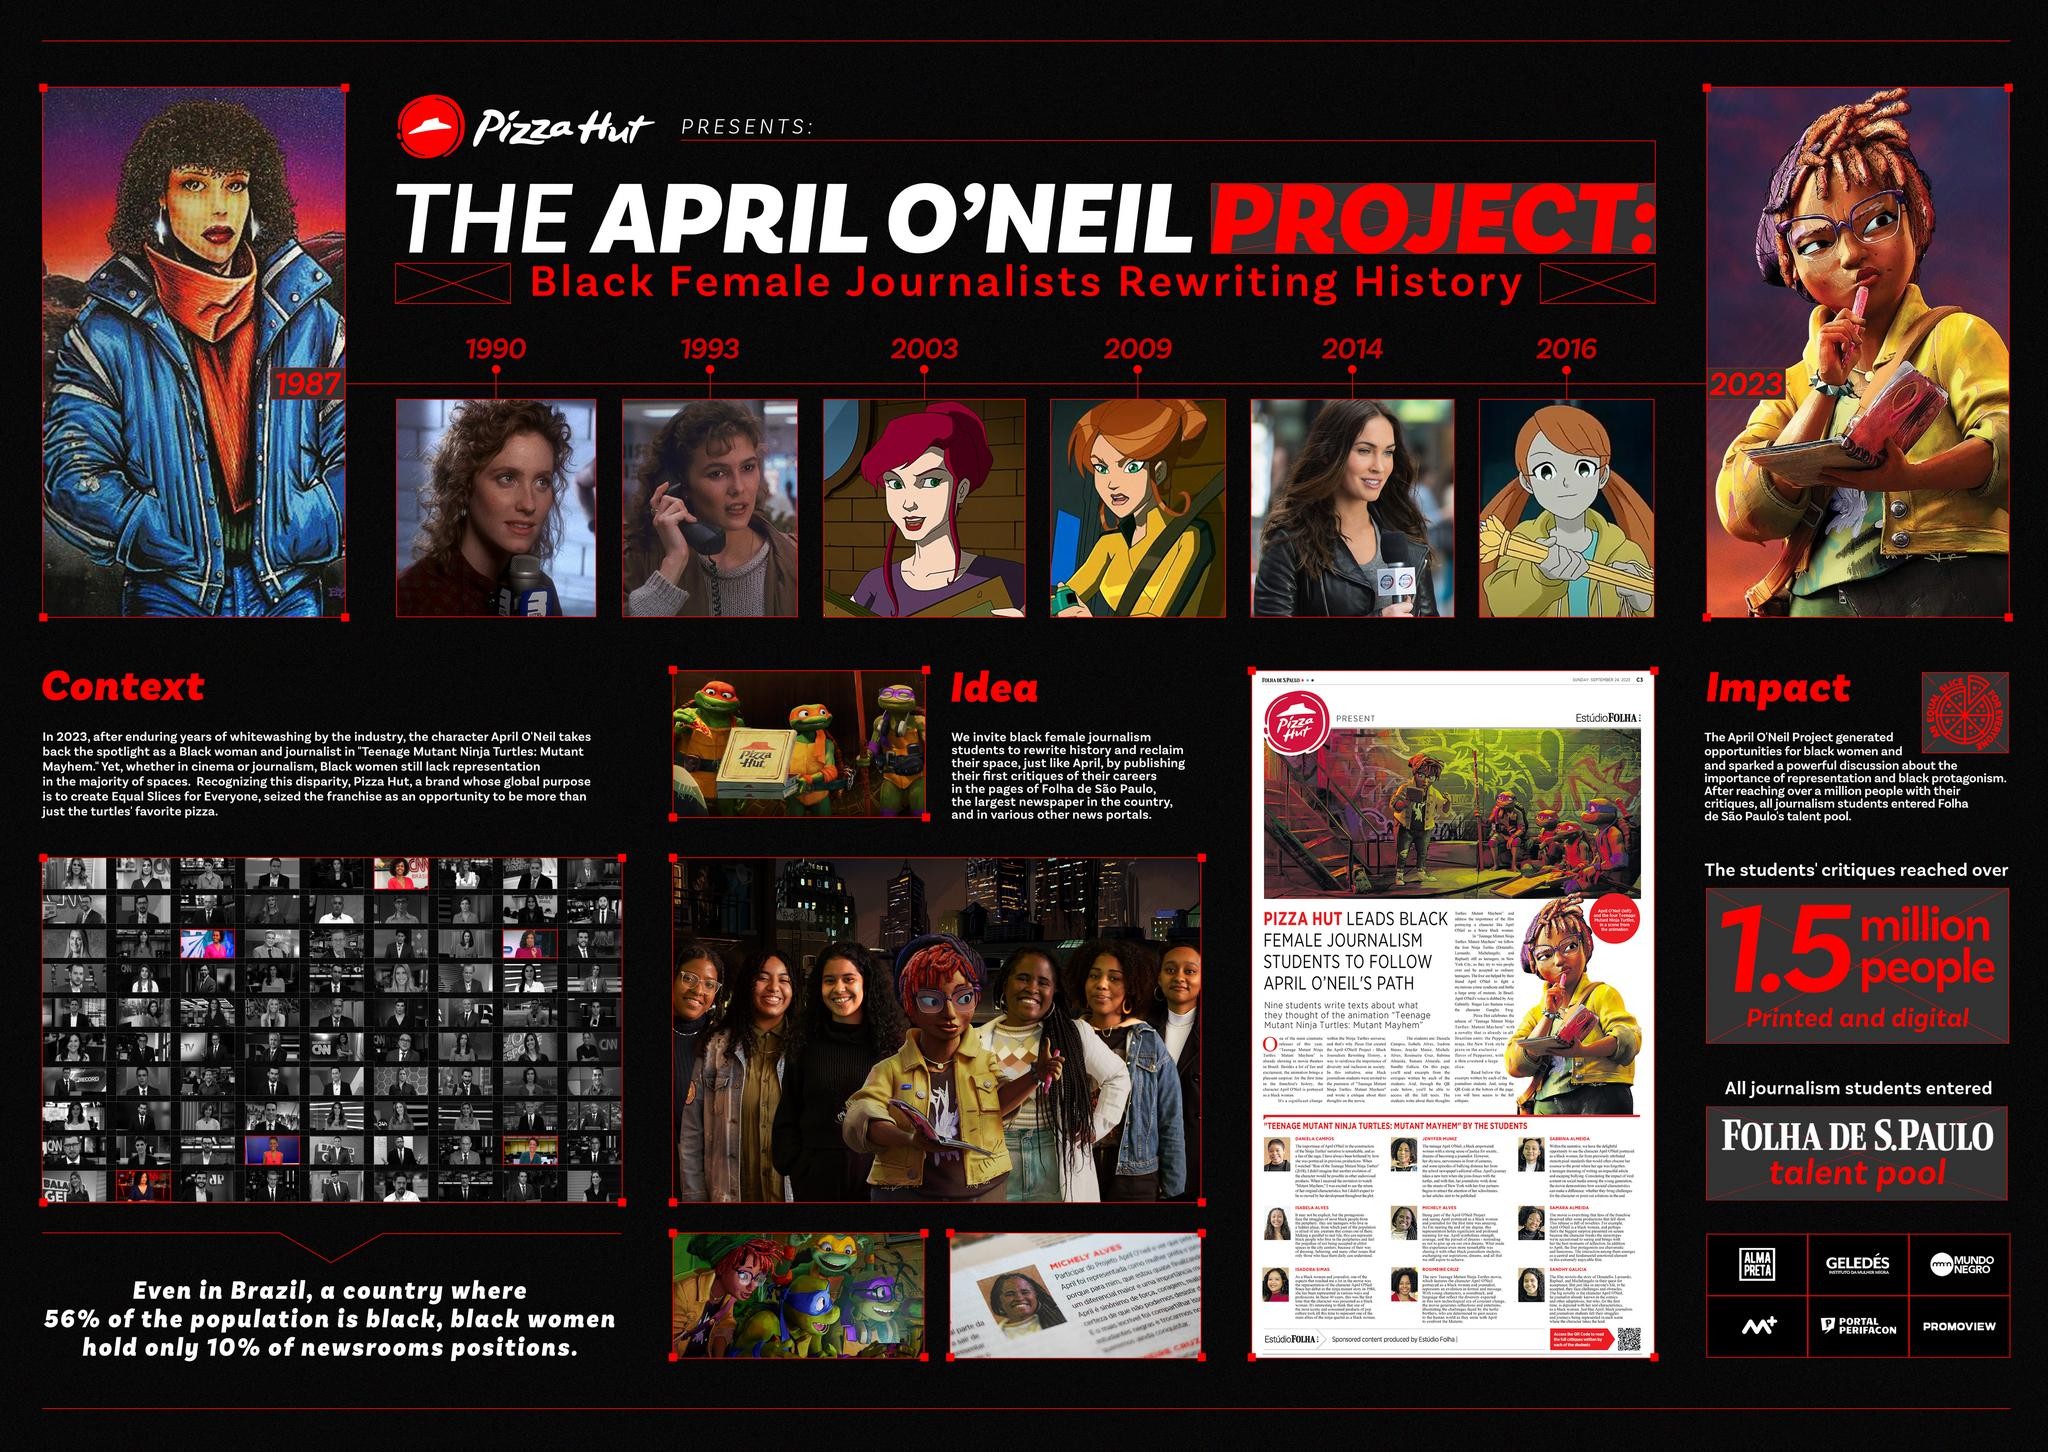 The April O'Neil Project